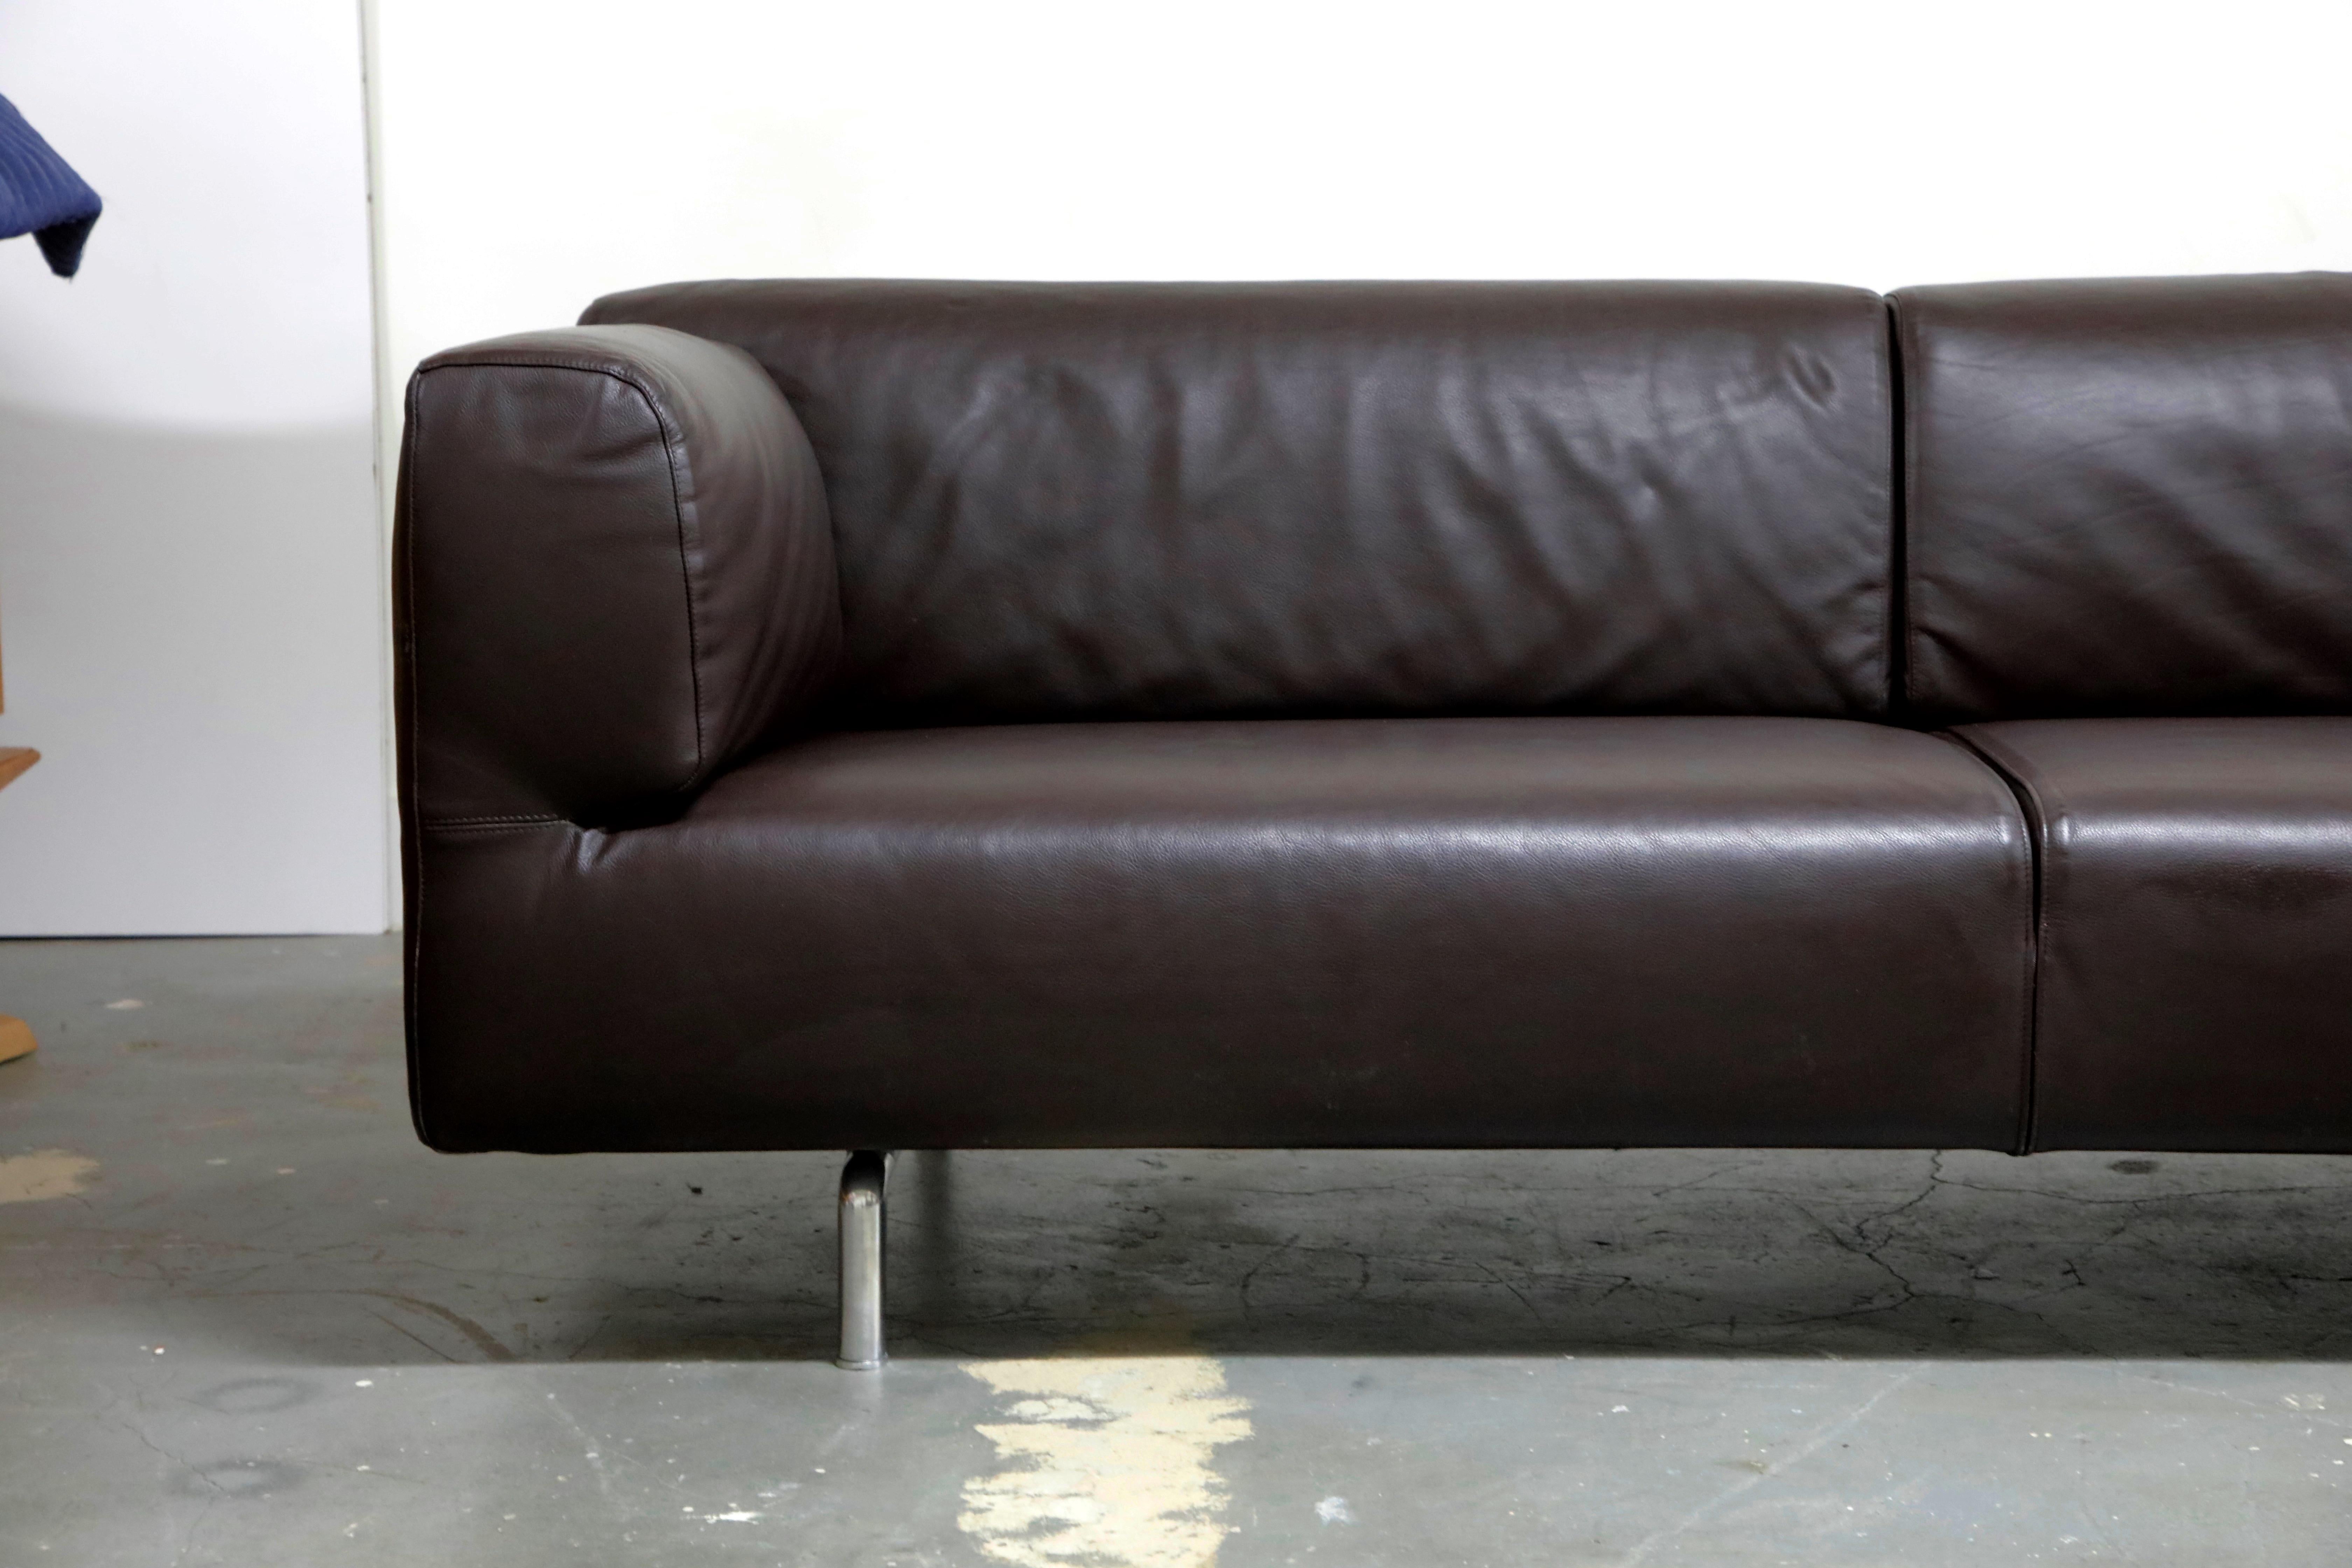 Aluminum '250 Met Two-Sofa' in Dark Brown Leather by Piero Lissoni for Cassina, Signed